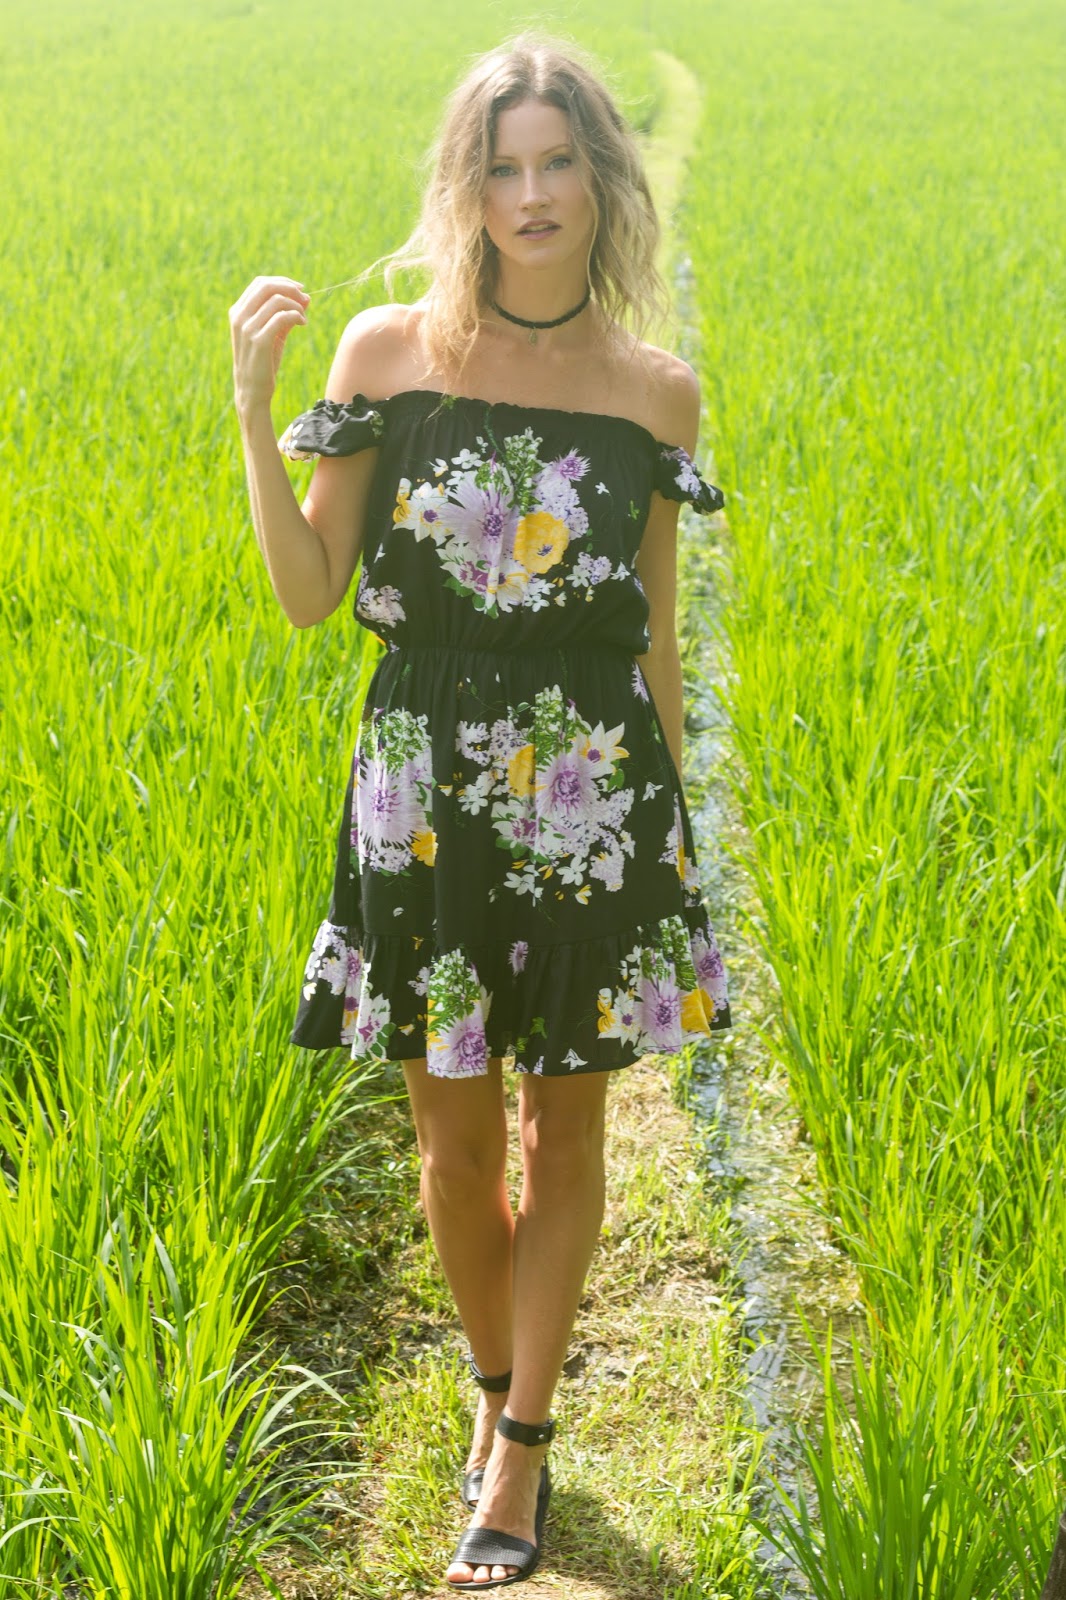 fashion and travel blogger, Alison Hutchinson, i s wearing the KAYVALYA Rosie Off The Shoulder Dress in Black Floral in a rice field in Bali